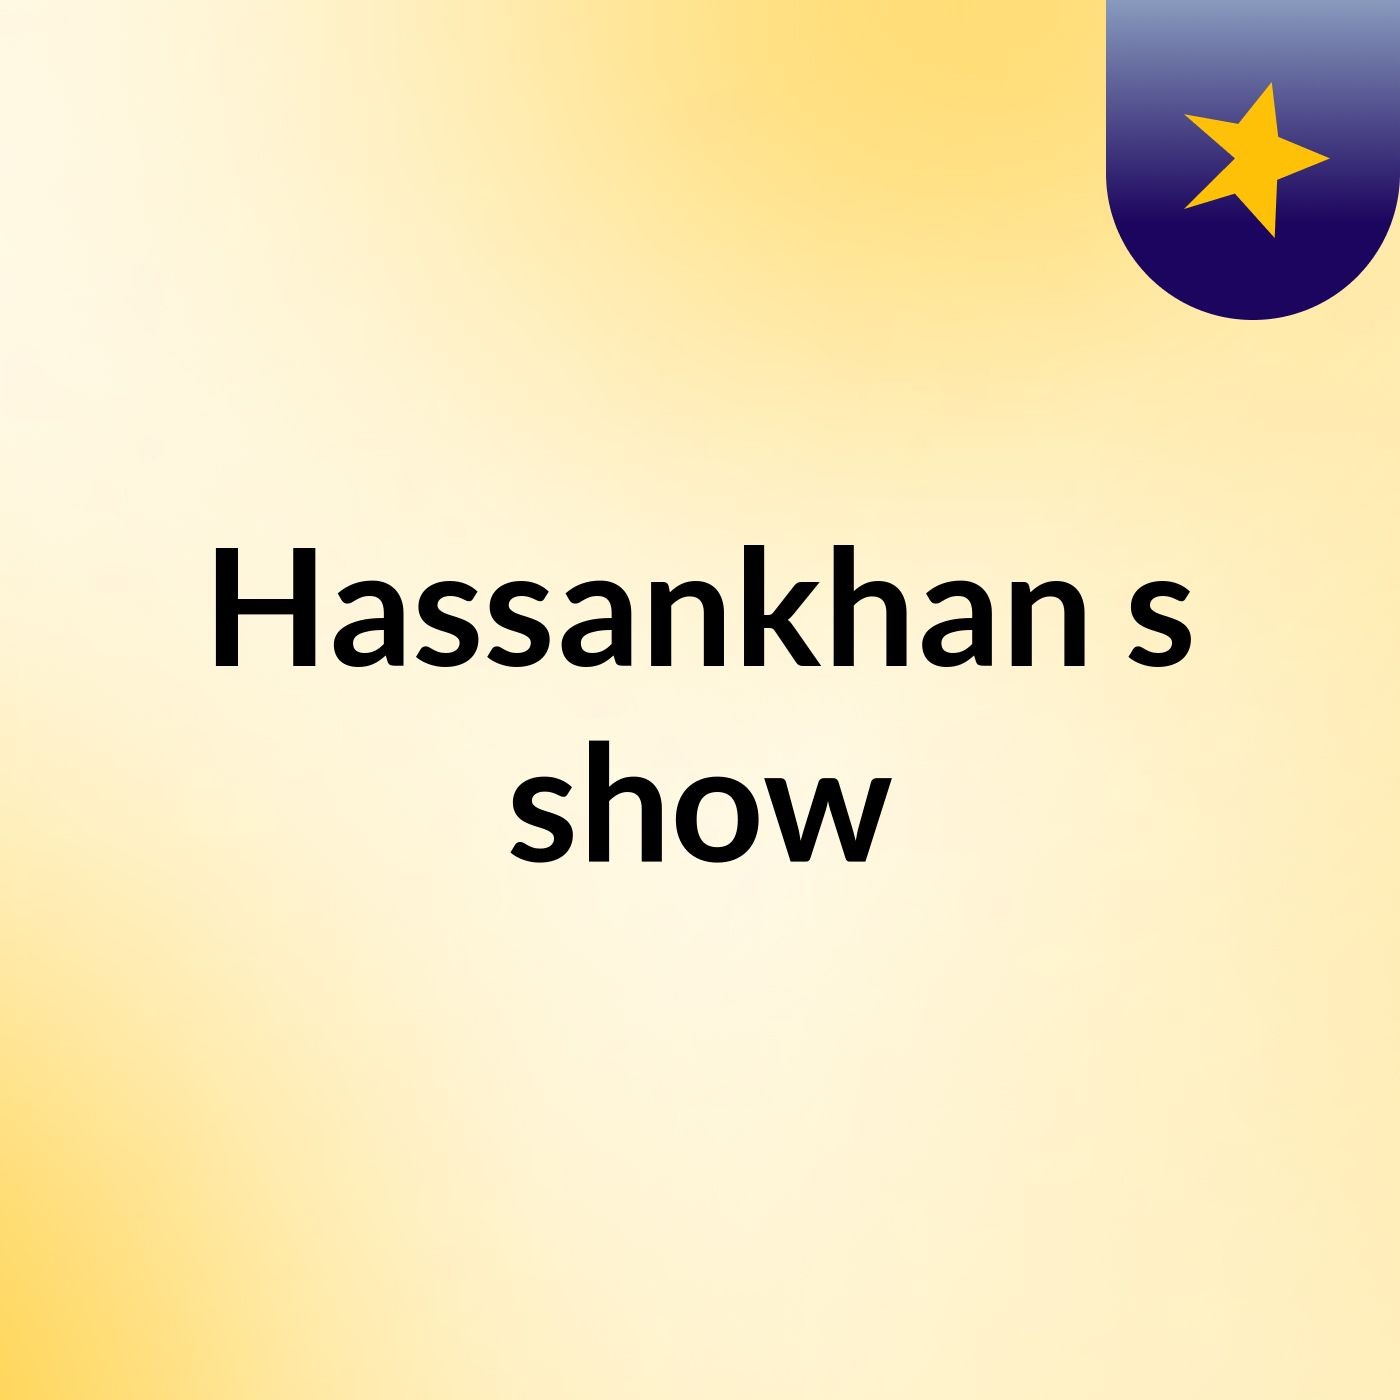 Hassankhan's show